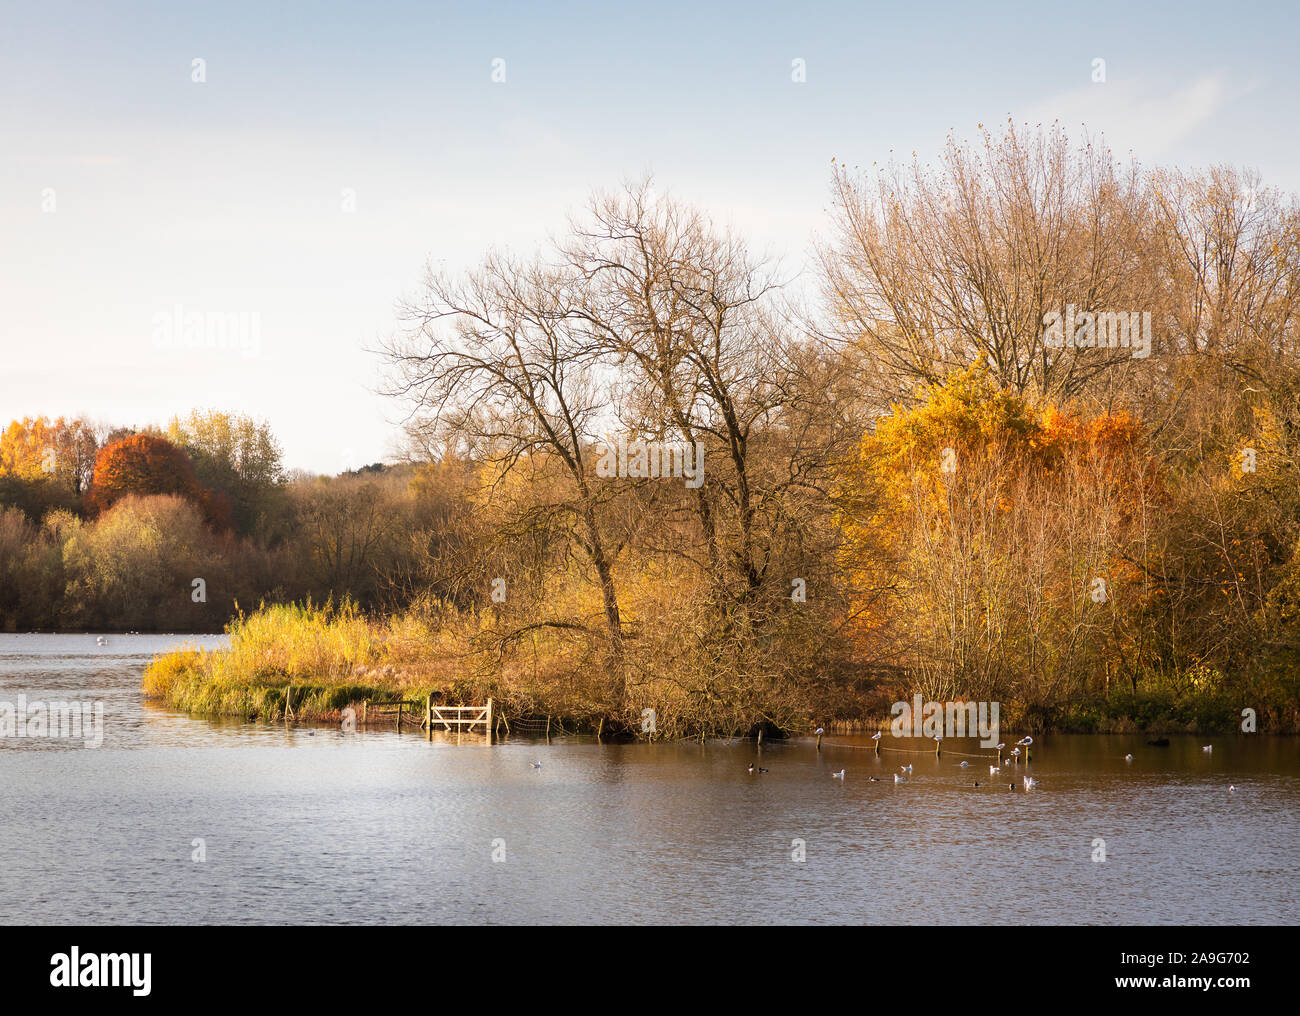 Daventry Country Park, Northamptonshire, UK: Morning sunlight catches autumn colours of leaves on trees standing by the water's edge. Stock Photo